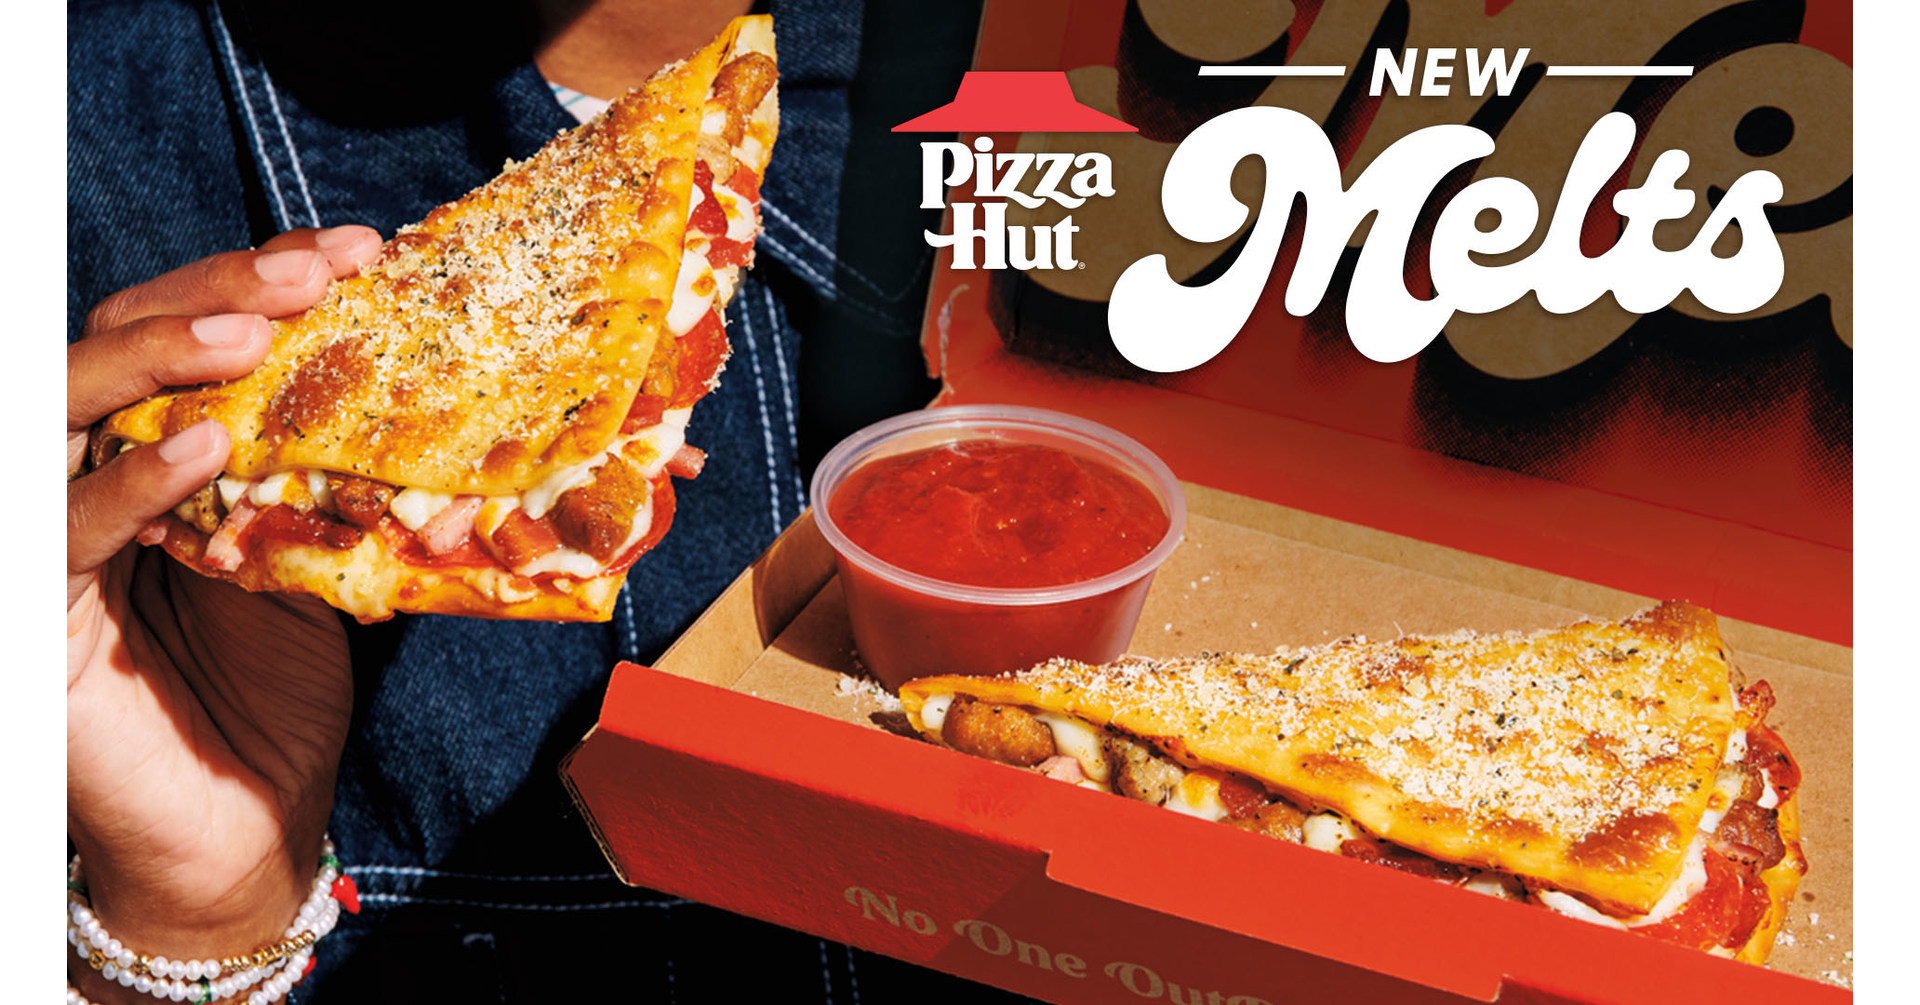 Pizza Hut Launches New Category and Product, MELTS, and They're Not for pizza hut northside drive valdosta georgia